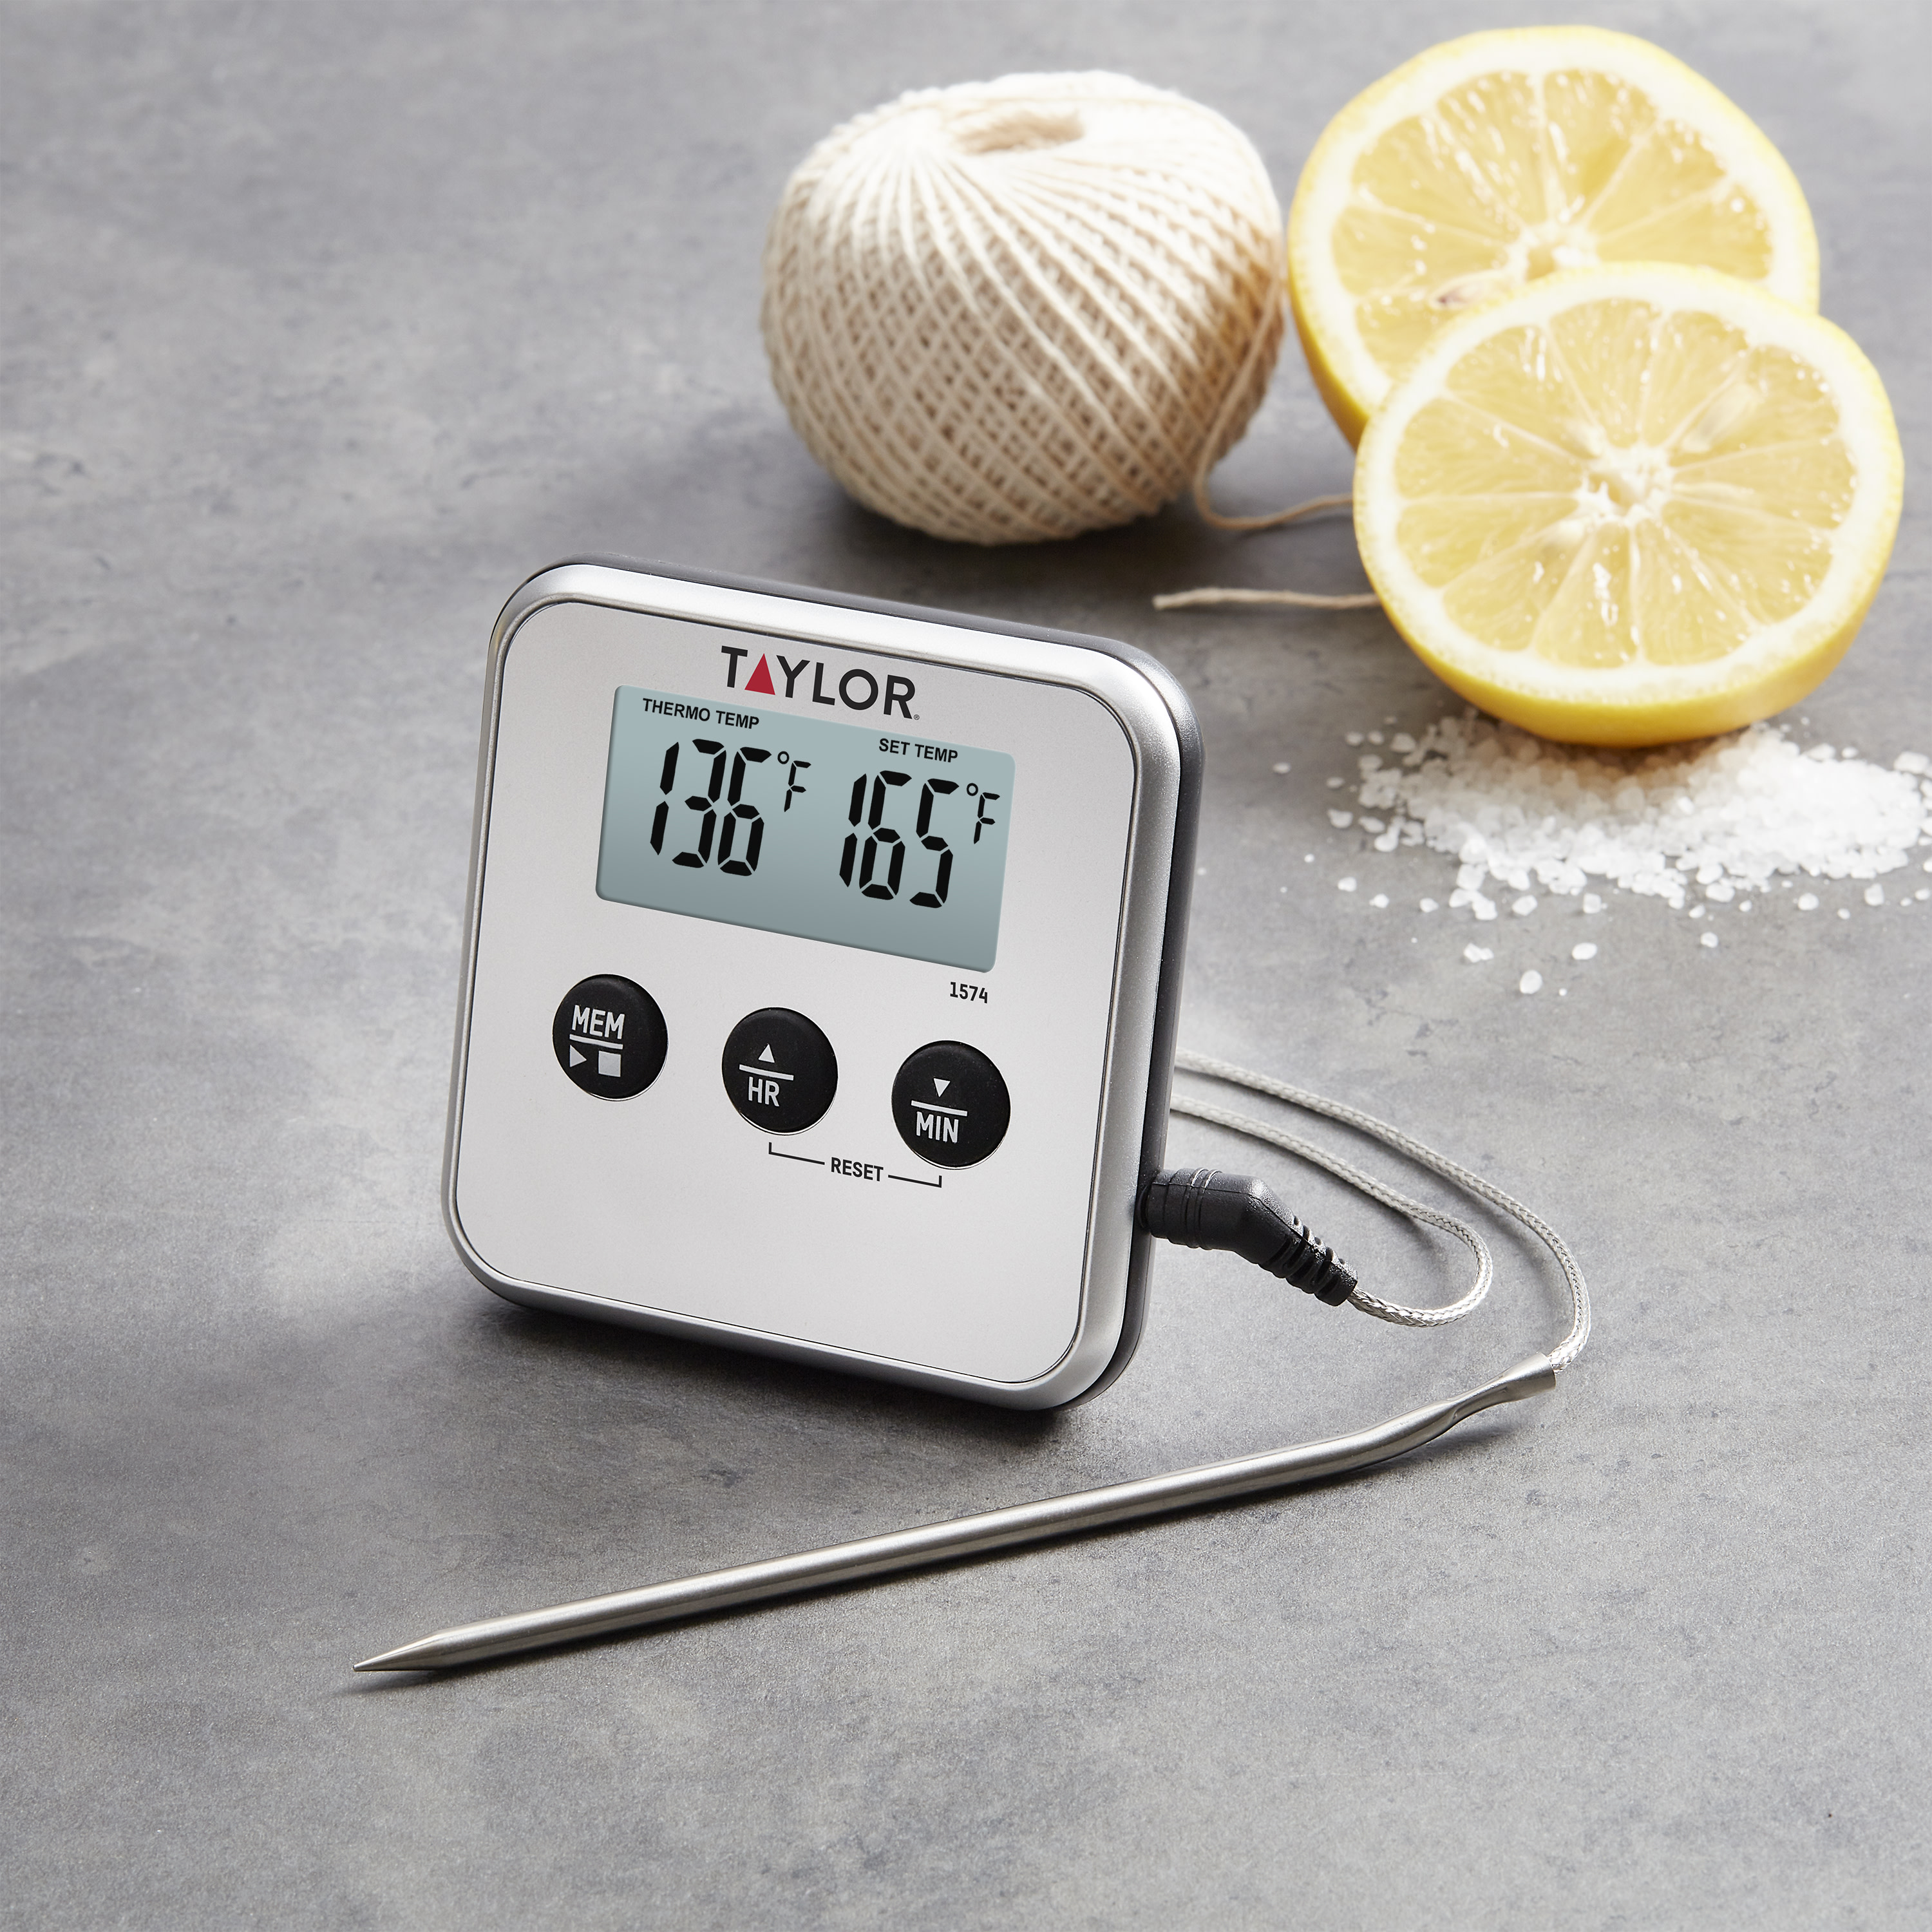 Taylor Digital Wired Probe Programmable Meat Thermometer with Timer - image 3 of 7